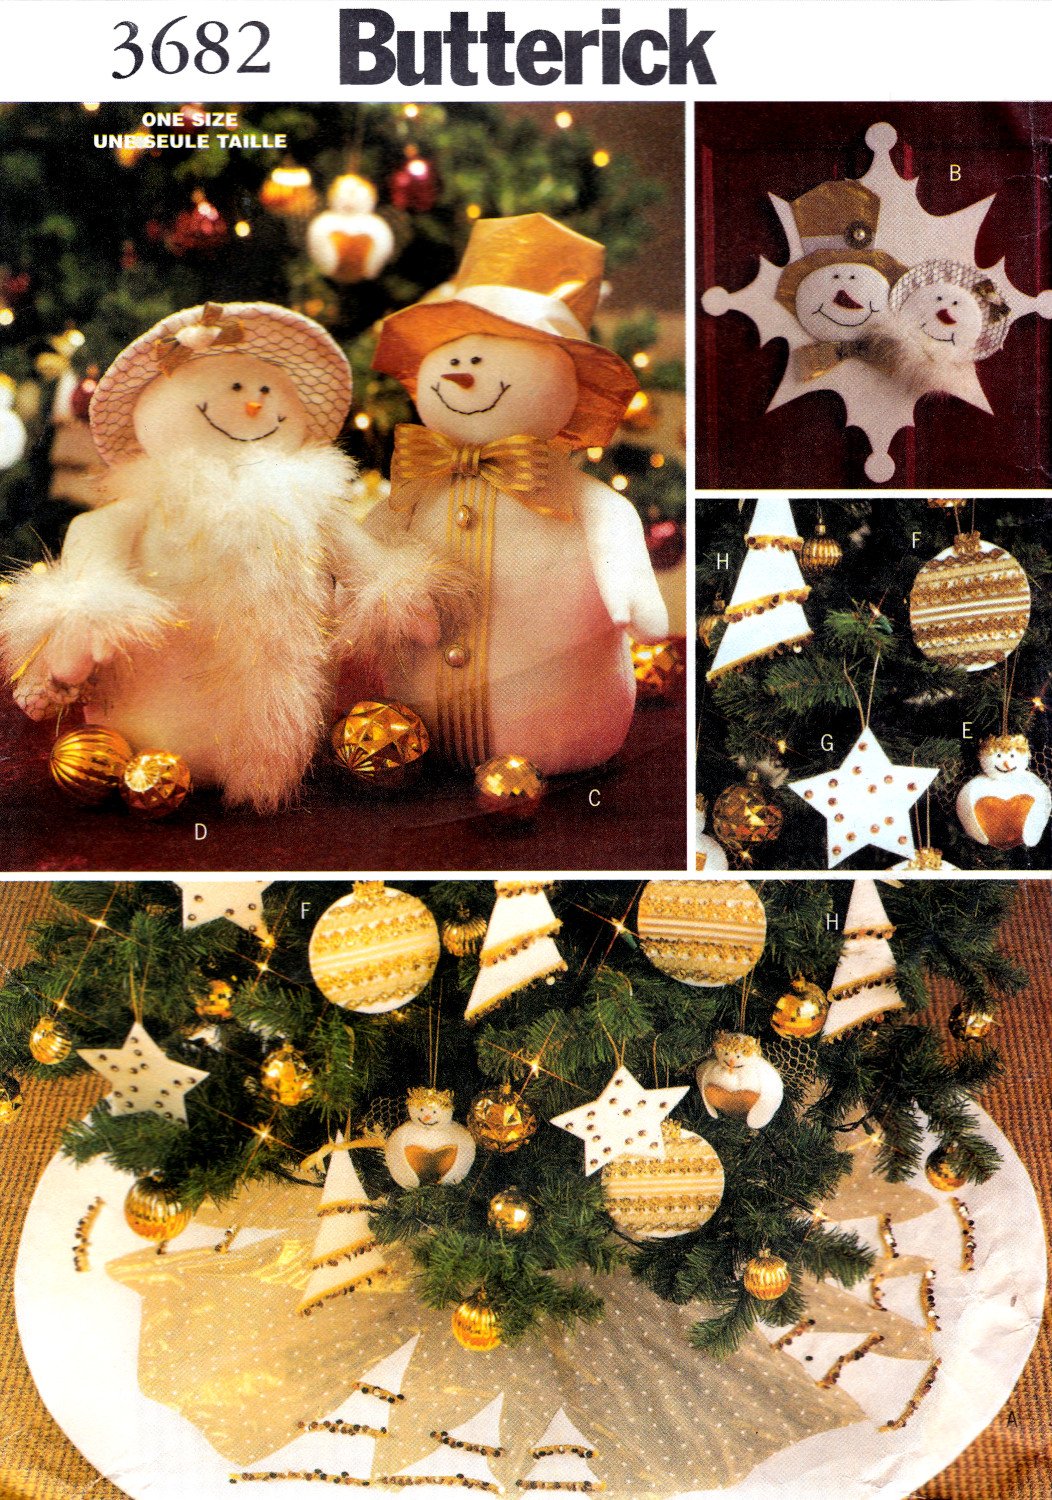 Butterick 3682 Holiday Decor Sewing Pattern Tree Skirt Snow People Ornament Sizes OSZ